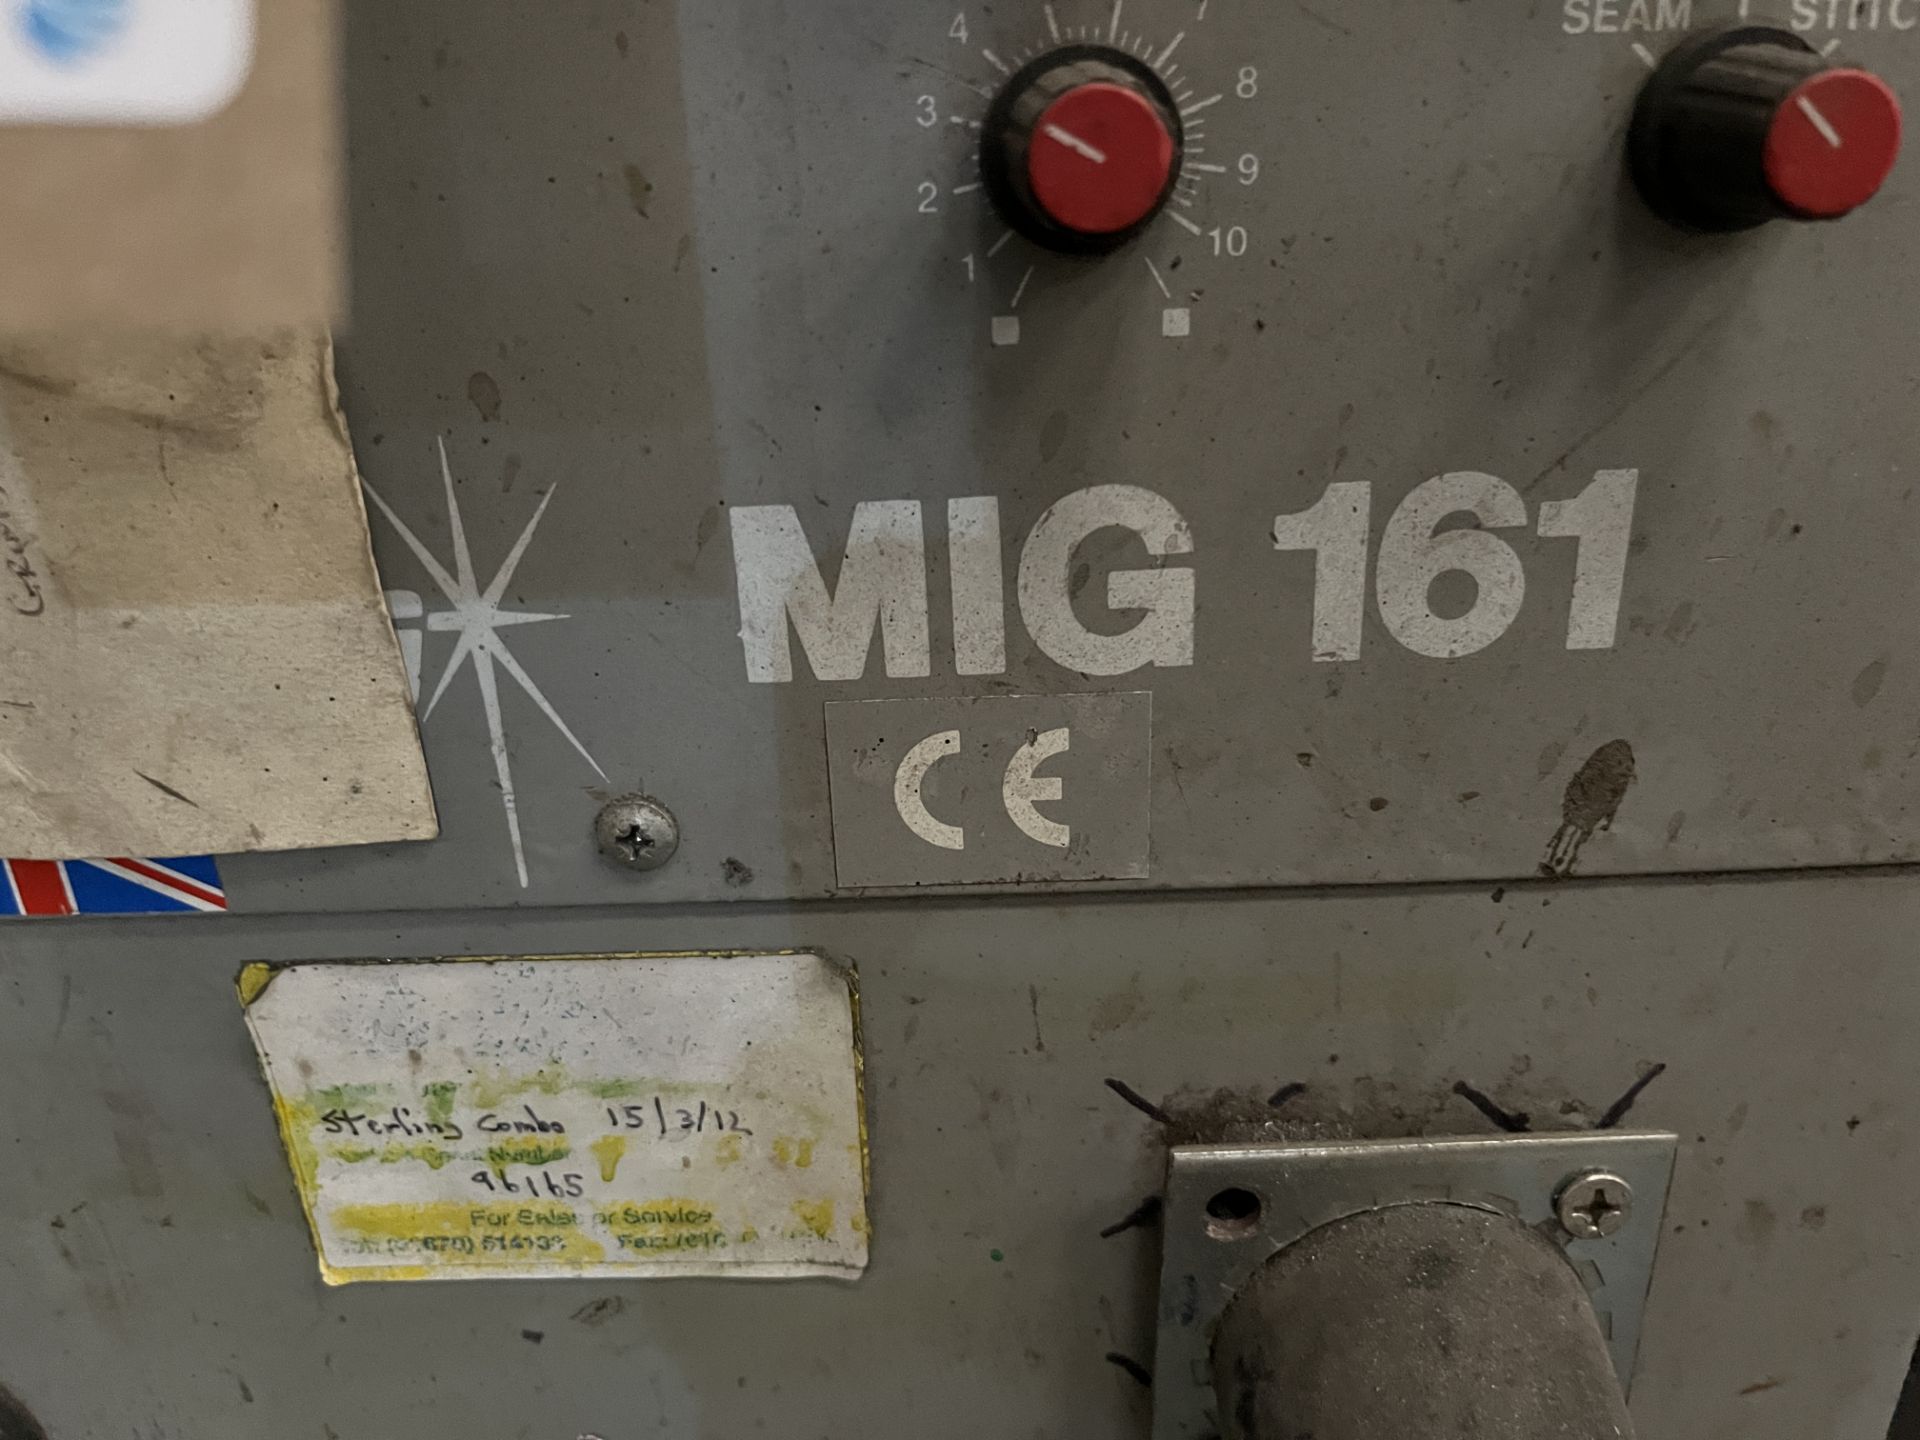 T W Sterling Combo Mig 161 Mobile Welding Set - Image 2 of 2